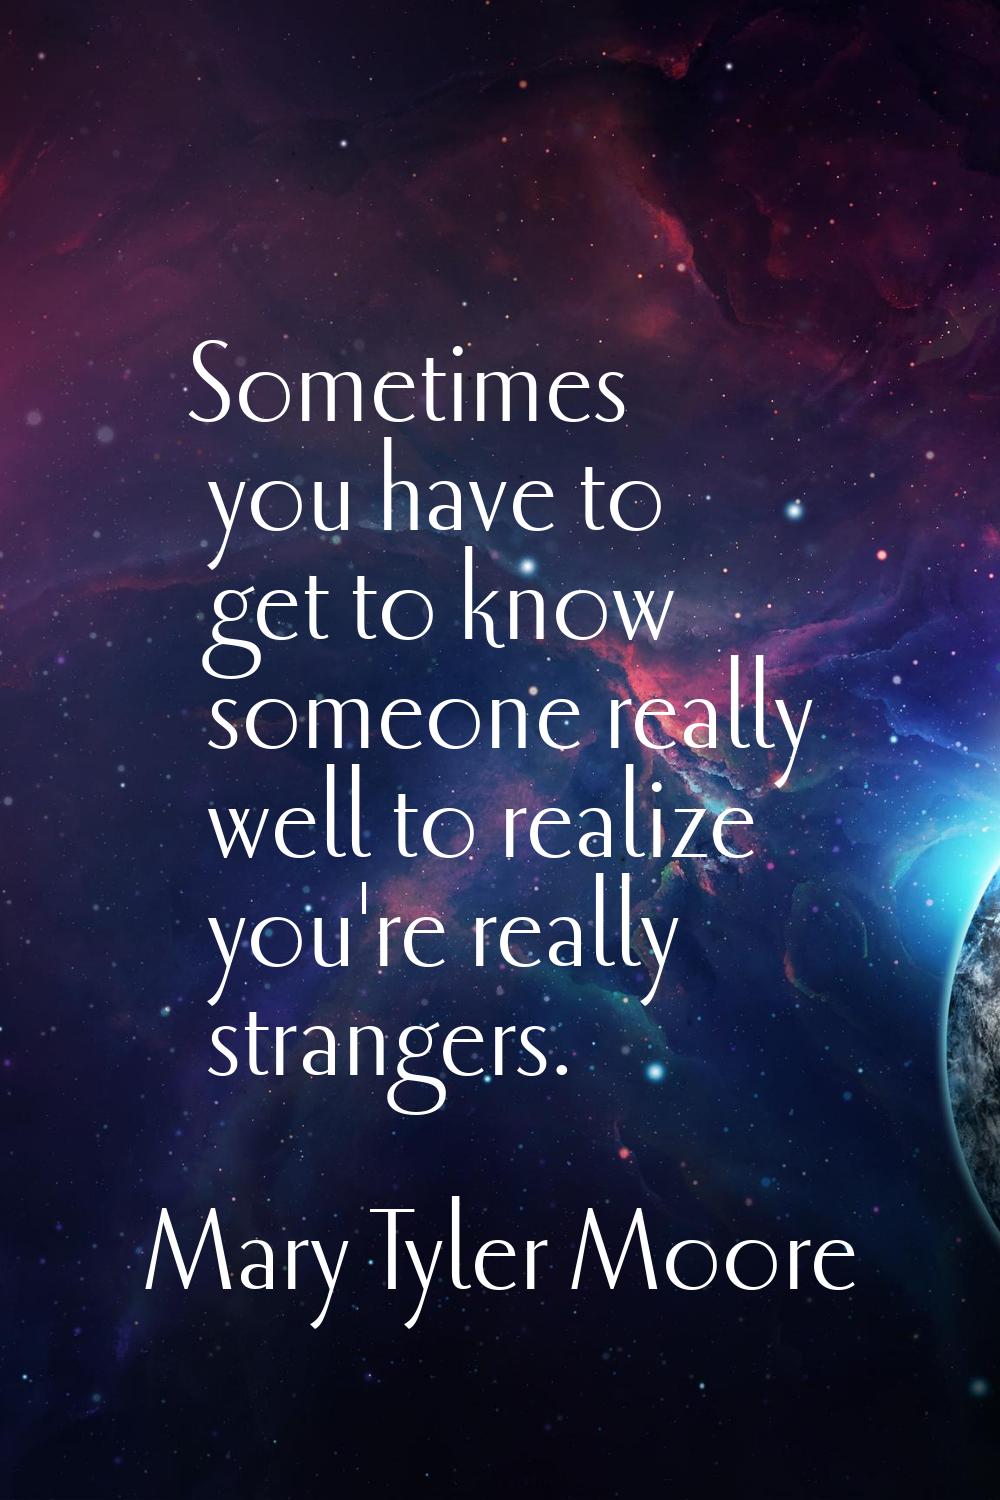 Sometimes you have to get to know someone really well to realize you're really strangers.